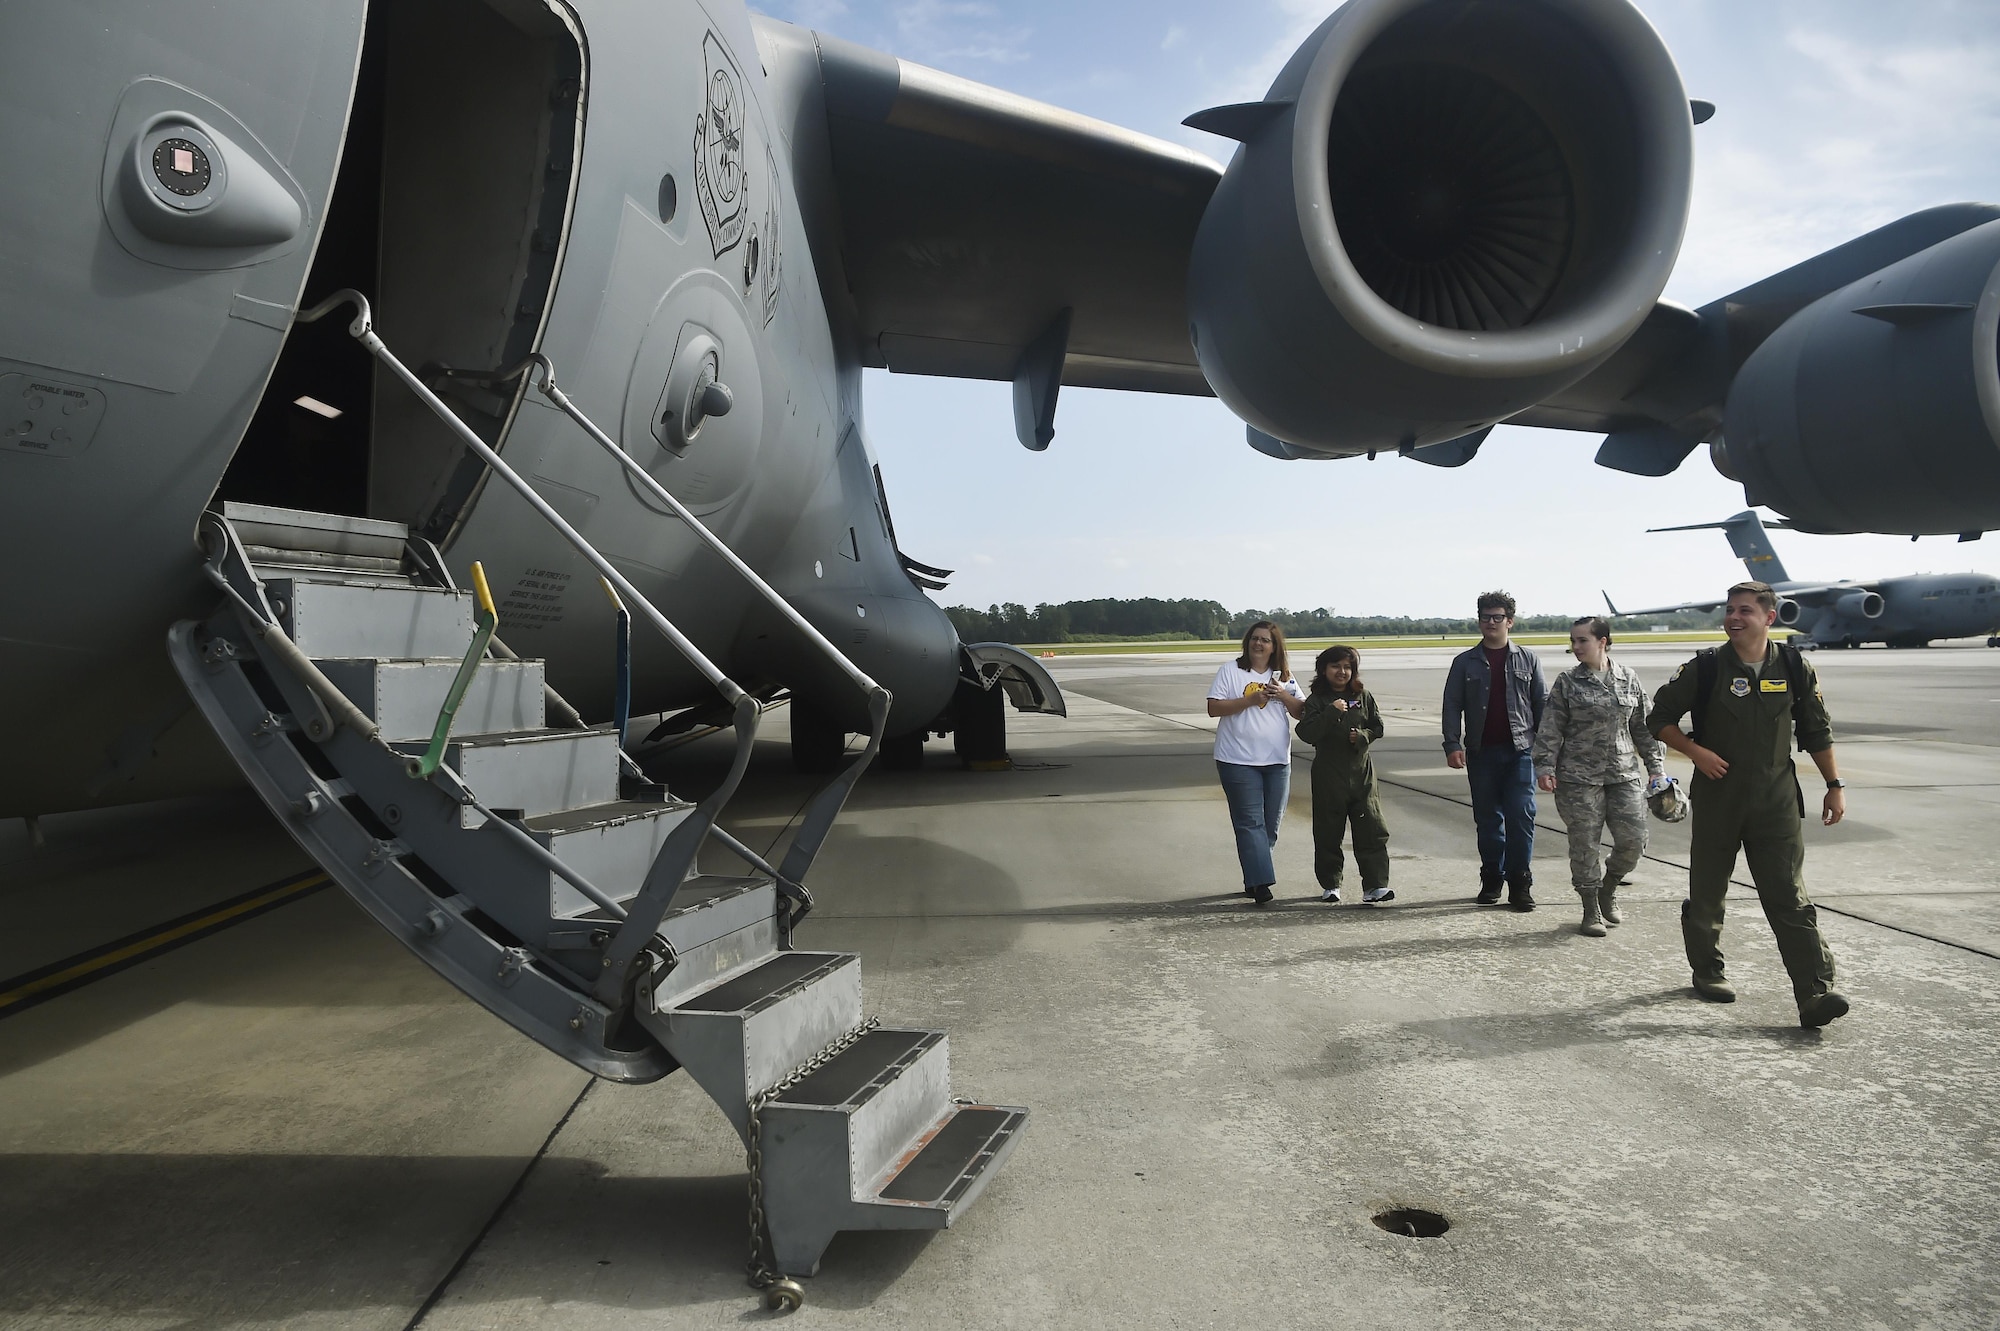 Sandrea Hershey, center left, 14 years old, her mother Lori Hershey, left, and friend Justin Pippin, center, follow Capt. Keane Carpenter, right, 437th Airlift Wing C-17 Globemaster III pilot, to a C-17 as part of an Airman for a Day event here, Oct. 2, 2017. The event was hosted by the 628th Air Base Wing and 437th AW.  Hershey was diagnosed with cancer in 2015 and spent approximately 170 days in a hospital. Despite her diagnosis Hershey kept up with her school work and finished her last treatment last month. Sandrea, her mother and her friend, were also able to meet 628th Security Forces Squadron Phoenix Raven members, observed a military working dog demonstration and test their piloting skills in a C-17 flight simulator. (U.S. Air Force photo by Staff Sgt. Christopher Hubenthal)